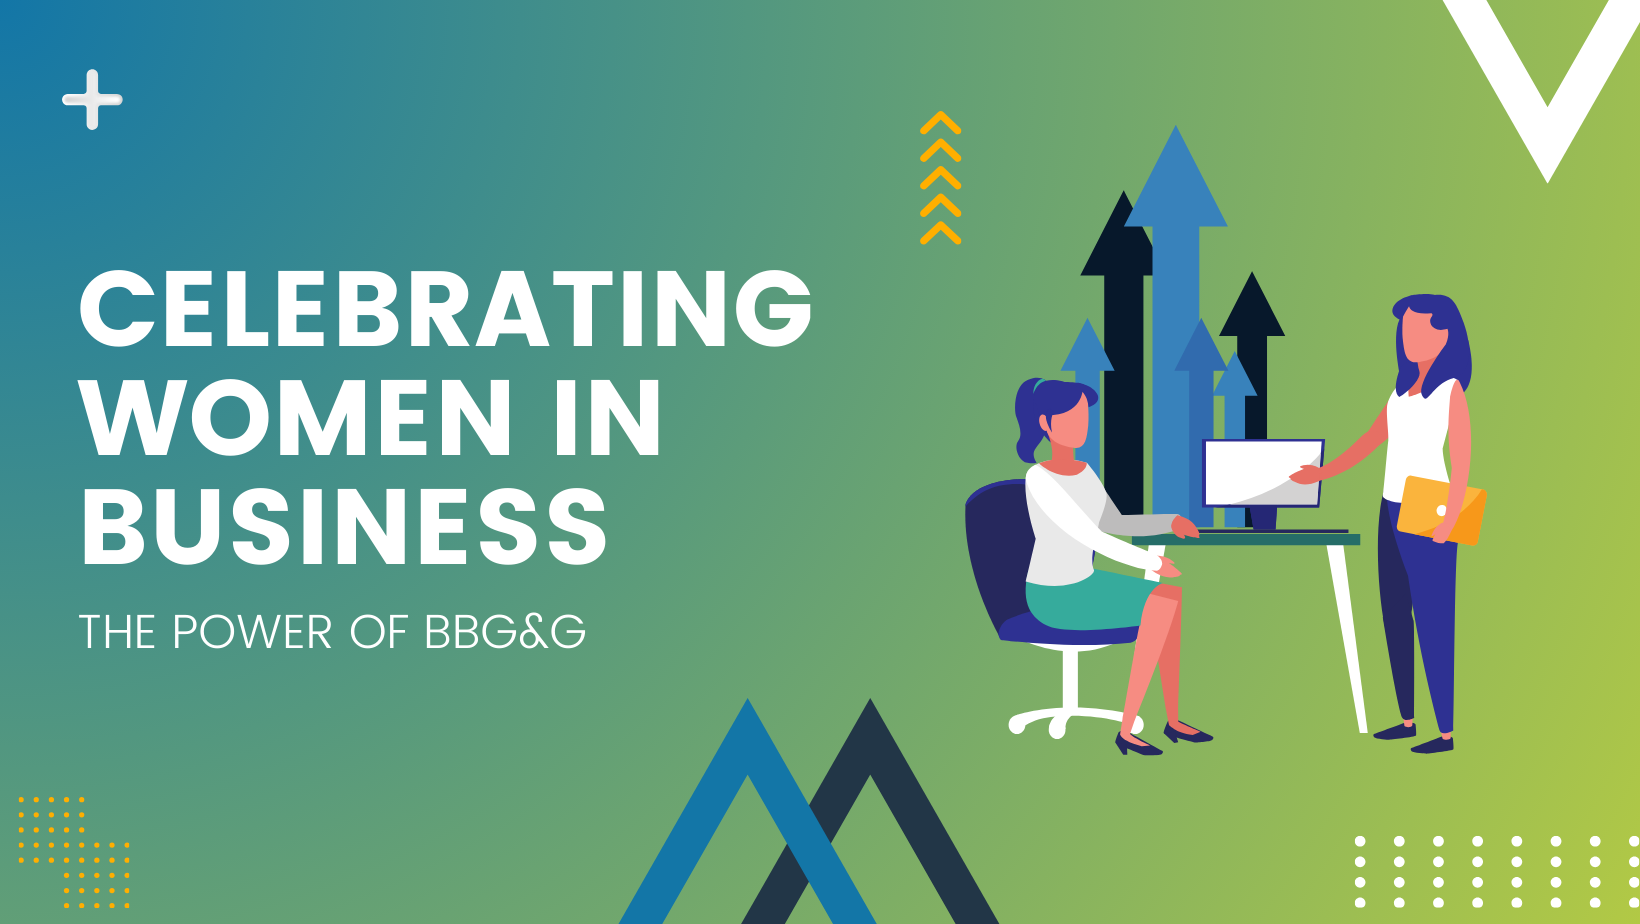 Celebrating Women in Business: The Power of BBG&G graphic